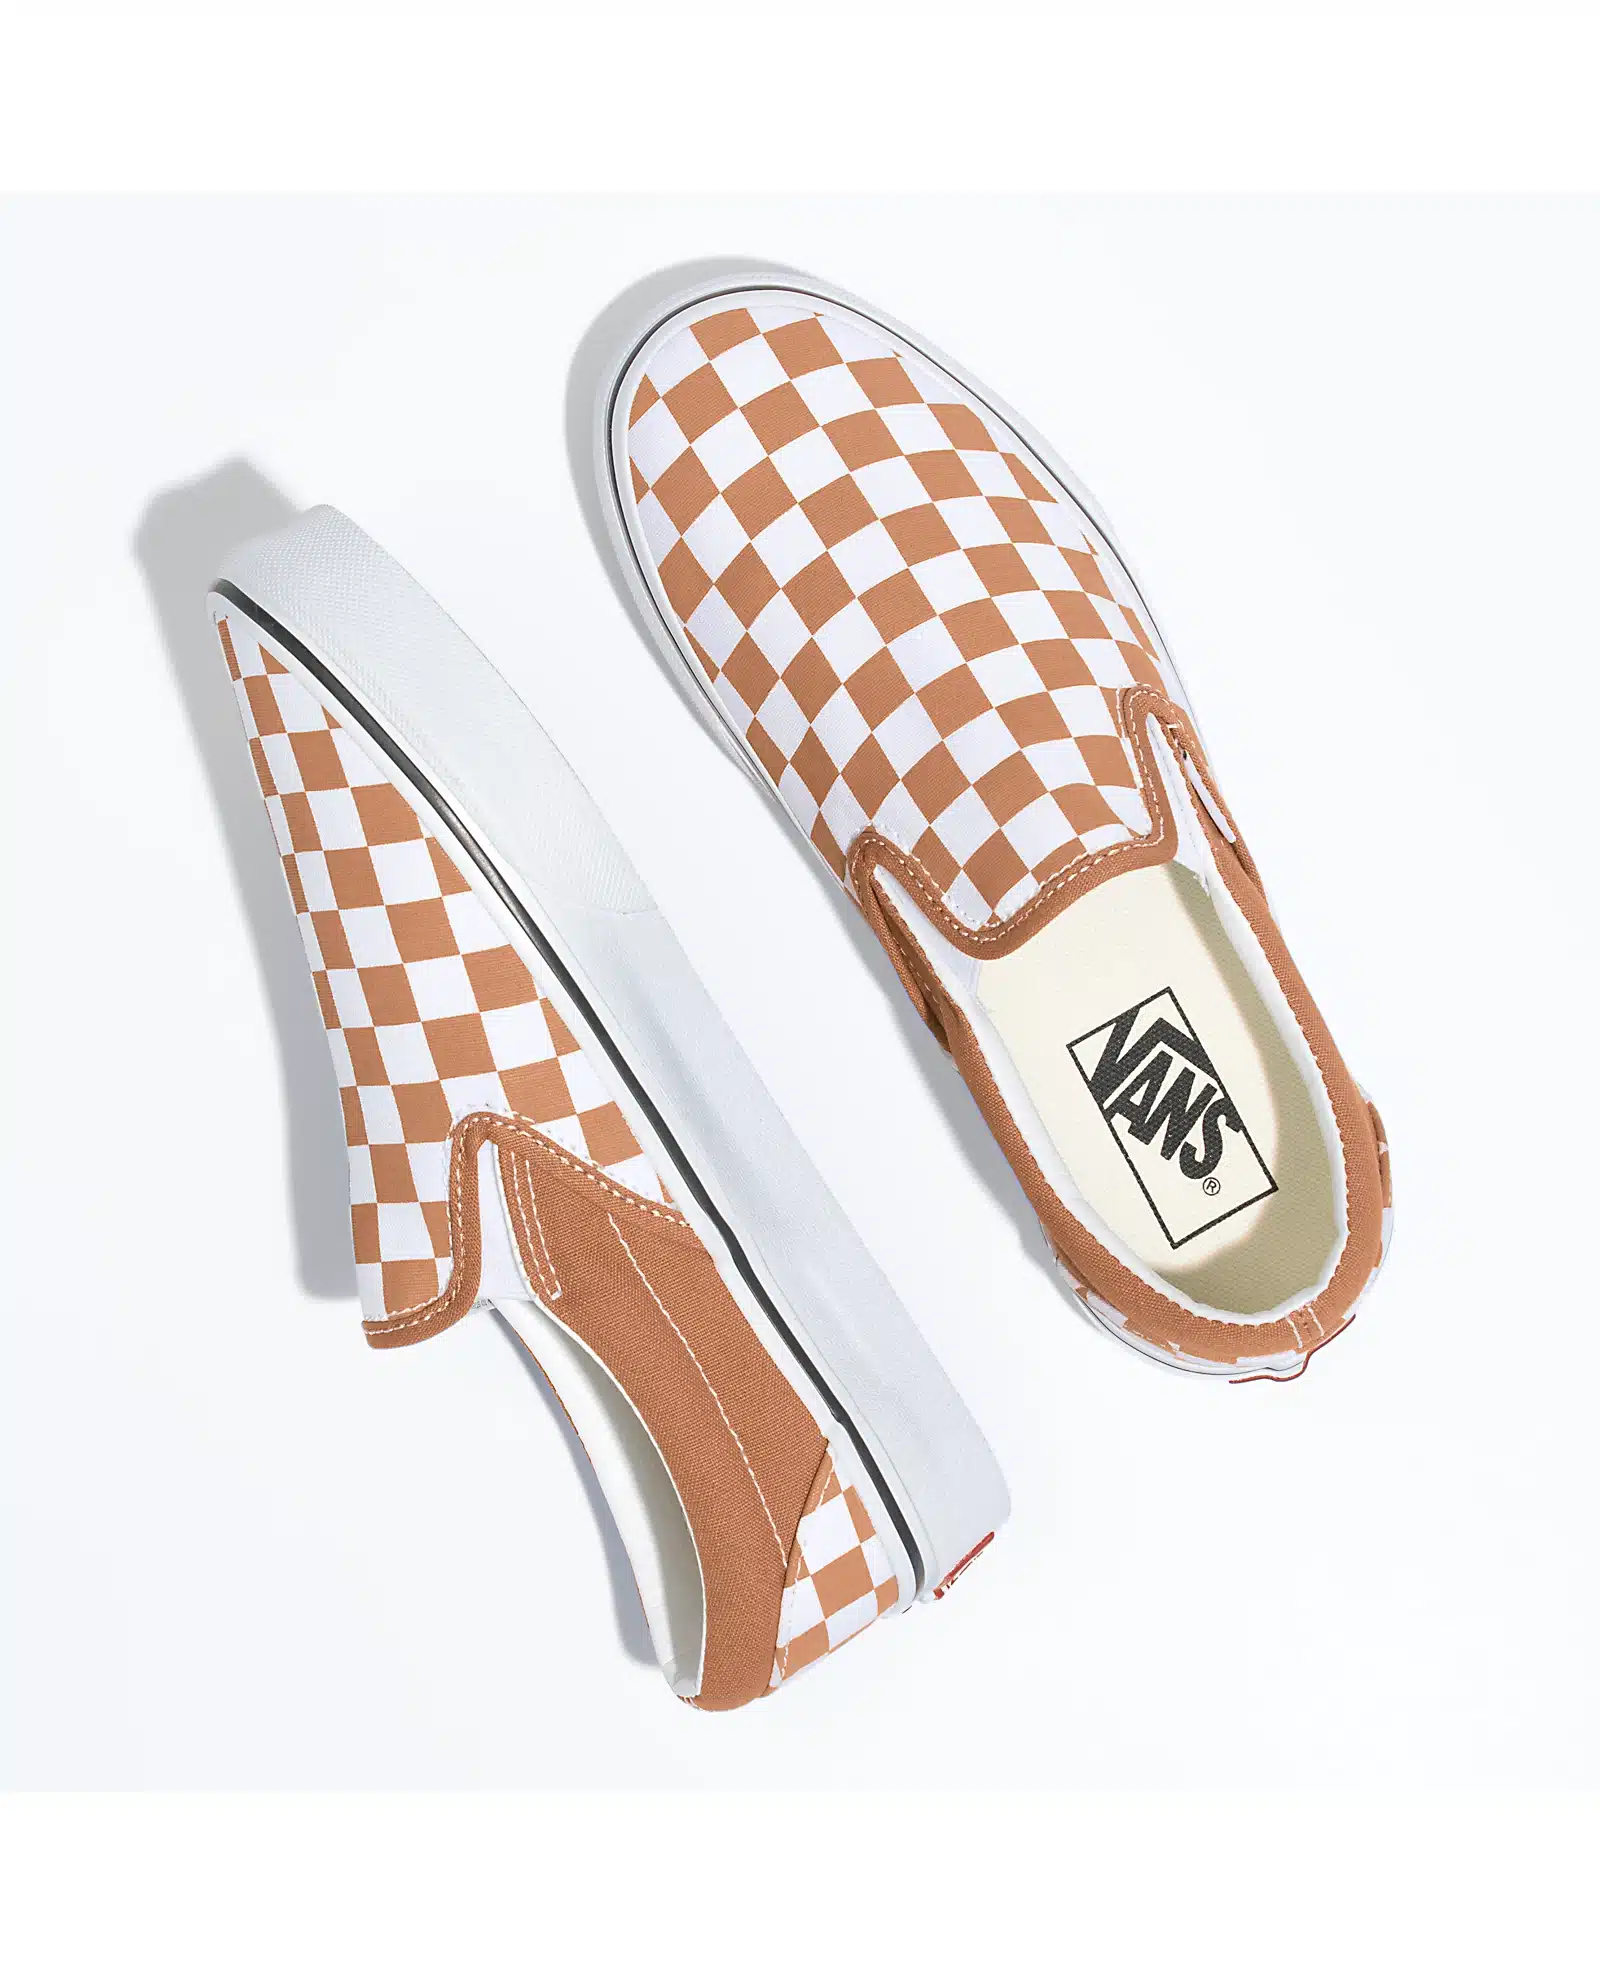 Vans Checkered Shoes on Clearance Sale